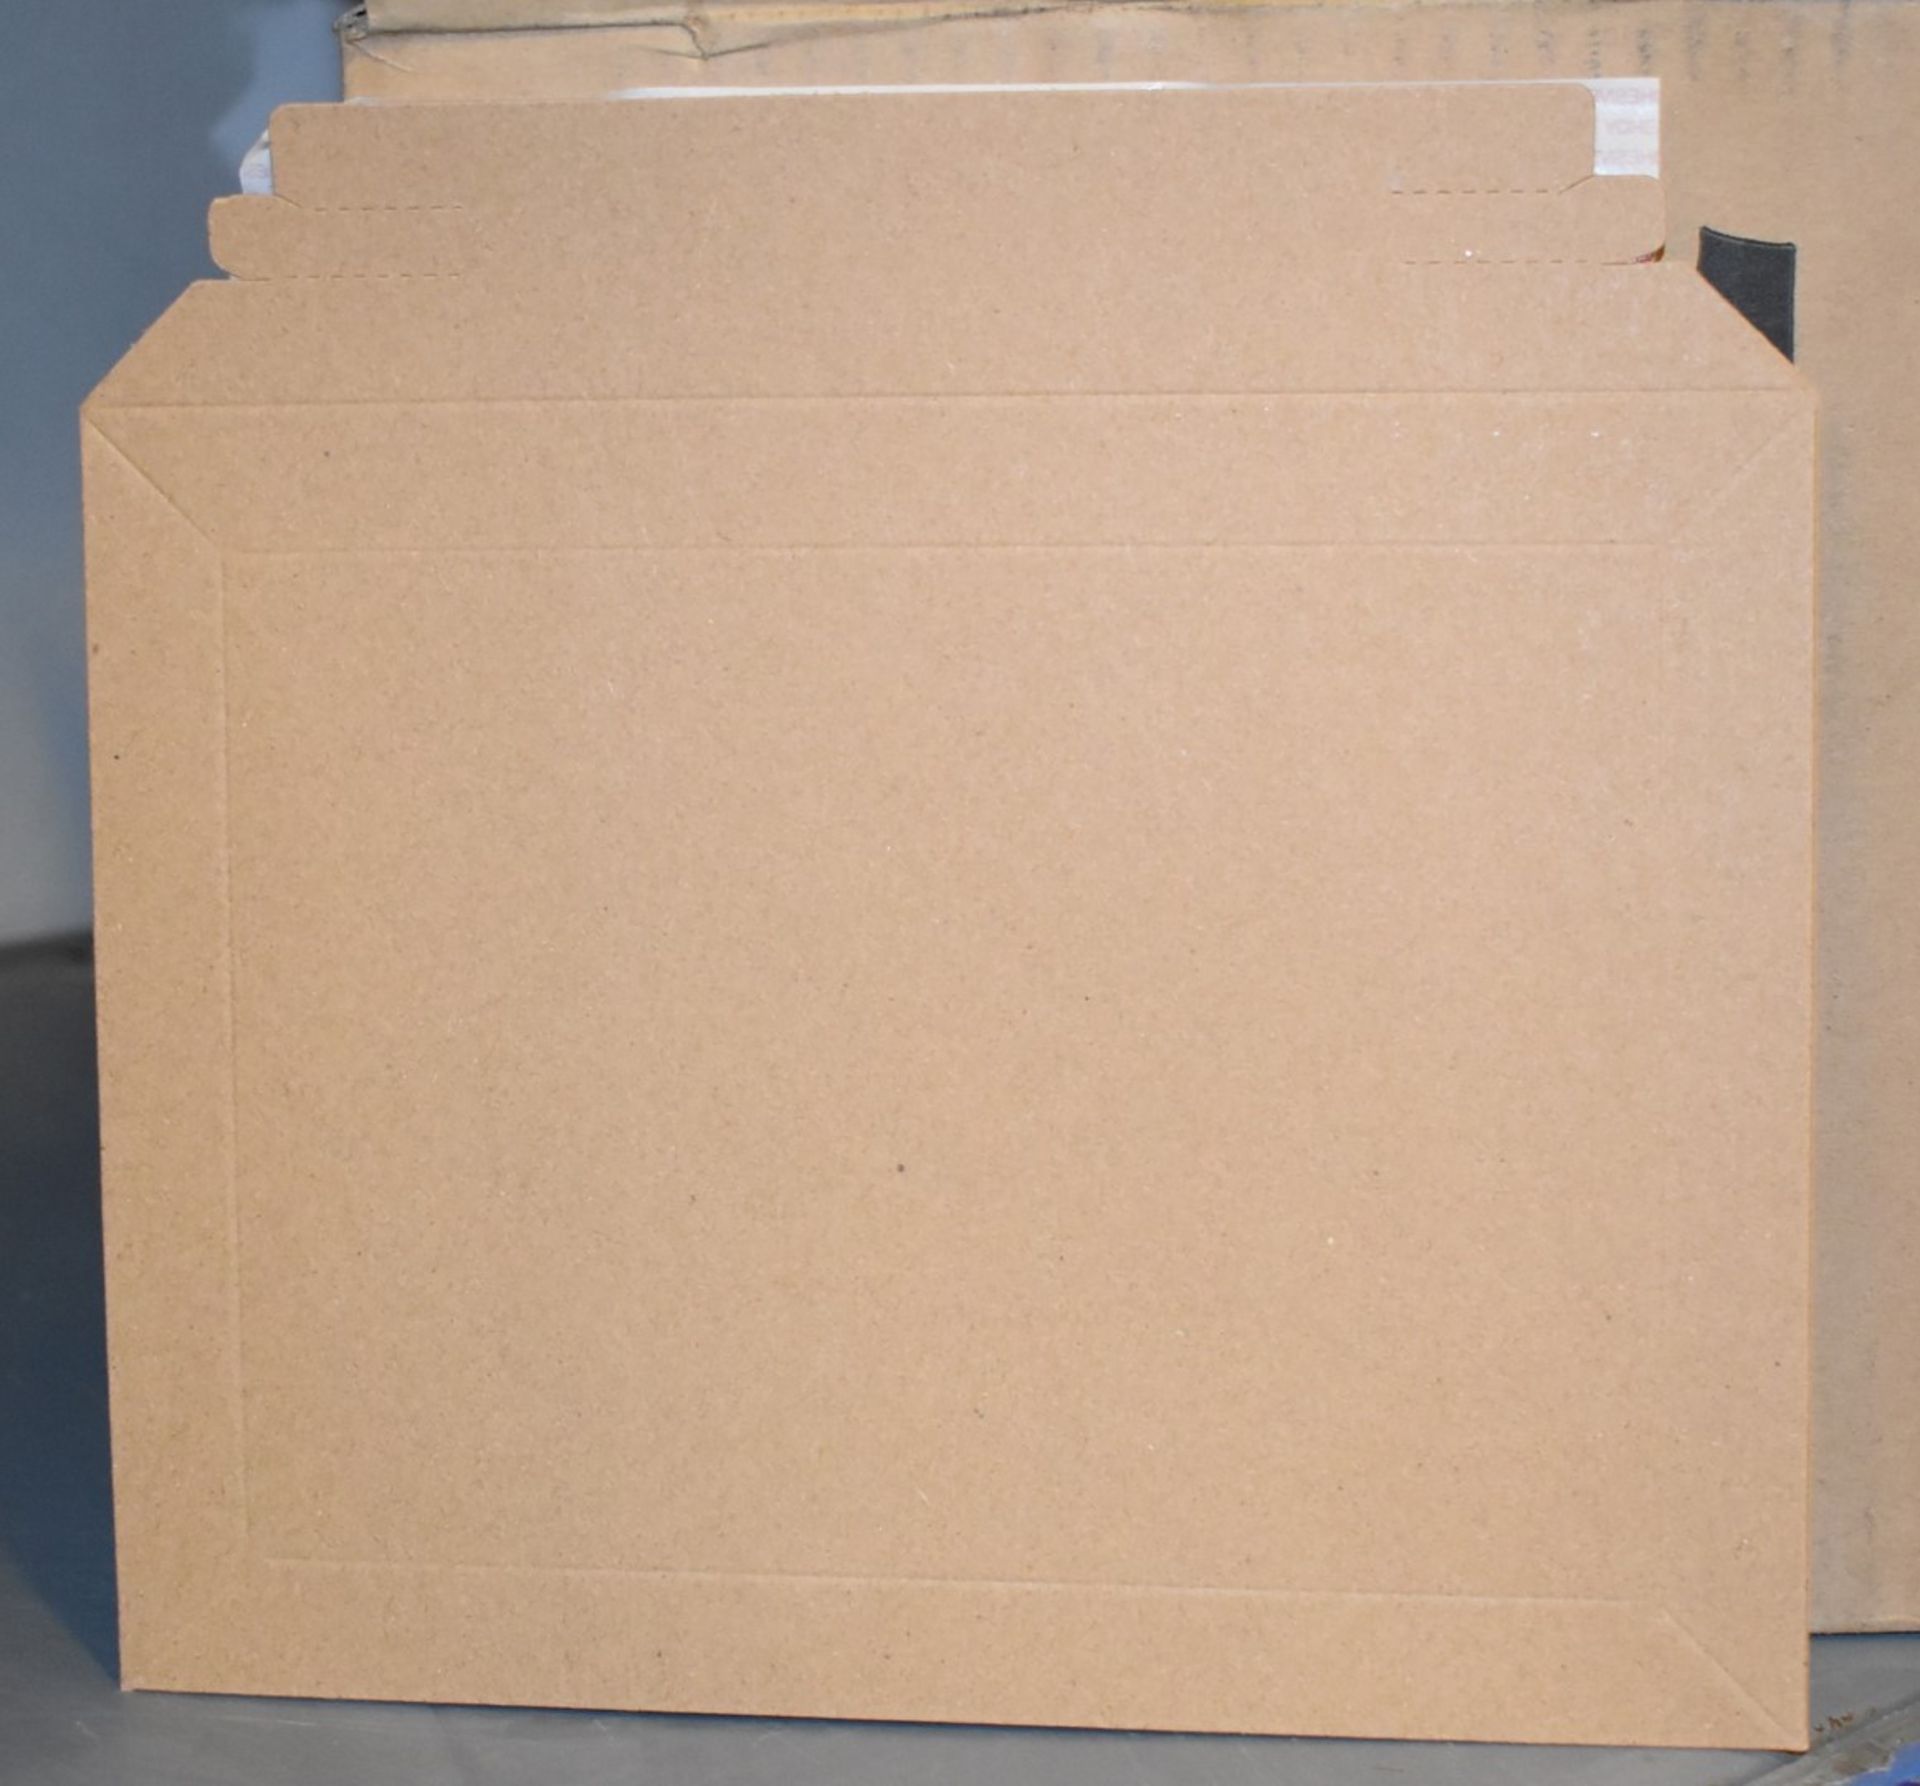 200 x Capacity Book Mailer Cardboard Envelopes - Size: 140 x 140 x 195mm - Includes 2 x Boxes of 100 - Image 2 of 6